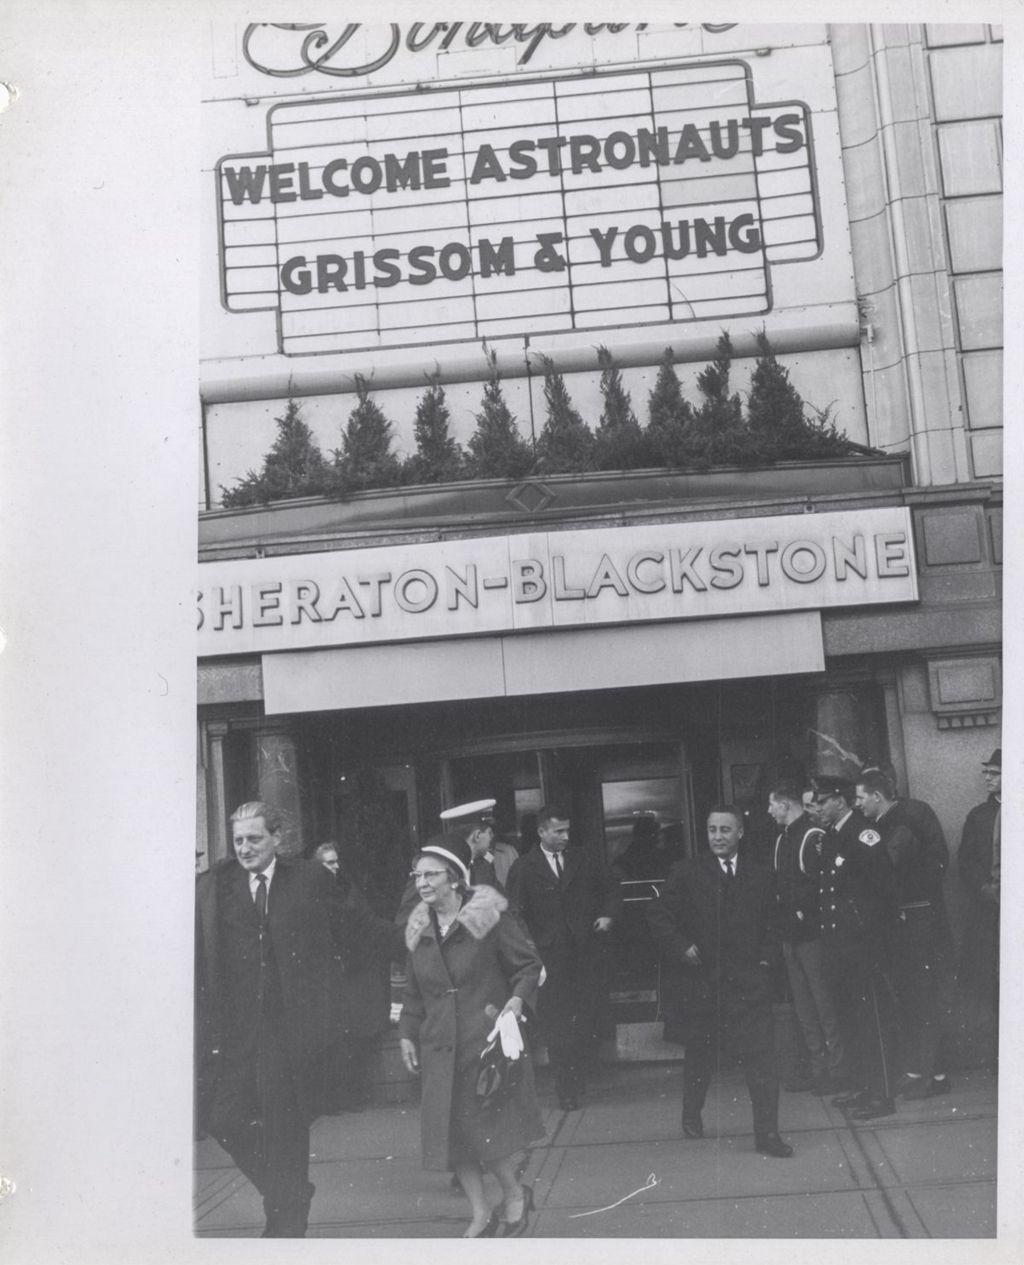 Astronauts Young and Grissom outside the Sheraton-Blackstone Hotel